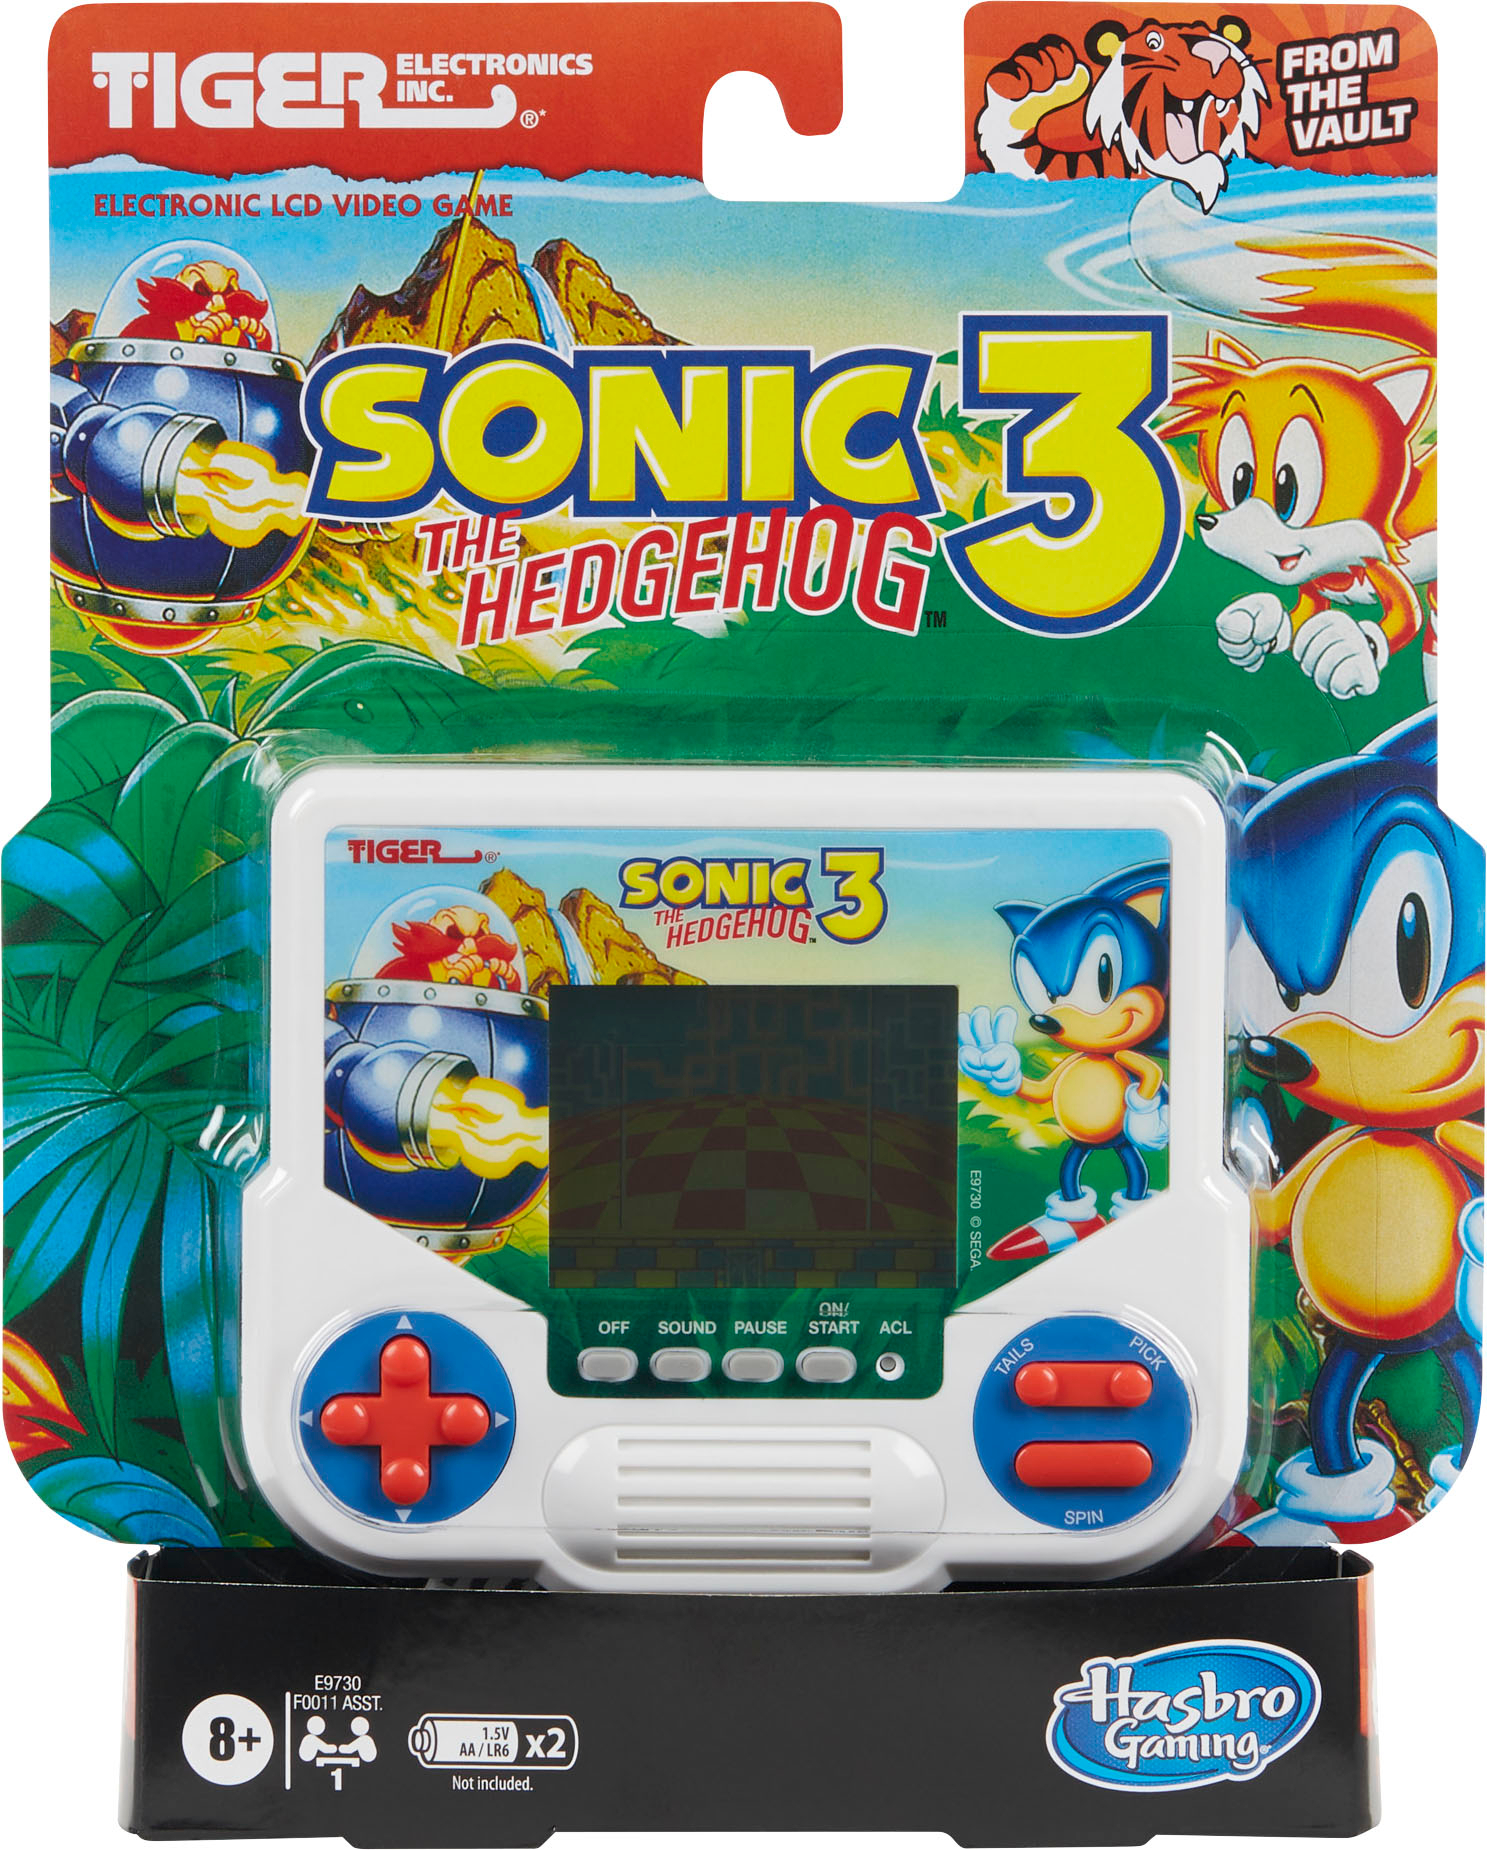 Hasbro Gaming Tiger Sonic The Hedgehog 3 Electronic LCD Video Game,  Retro-Inspired Edition, Handheld 1-Player, Ages 8 and Up